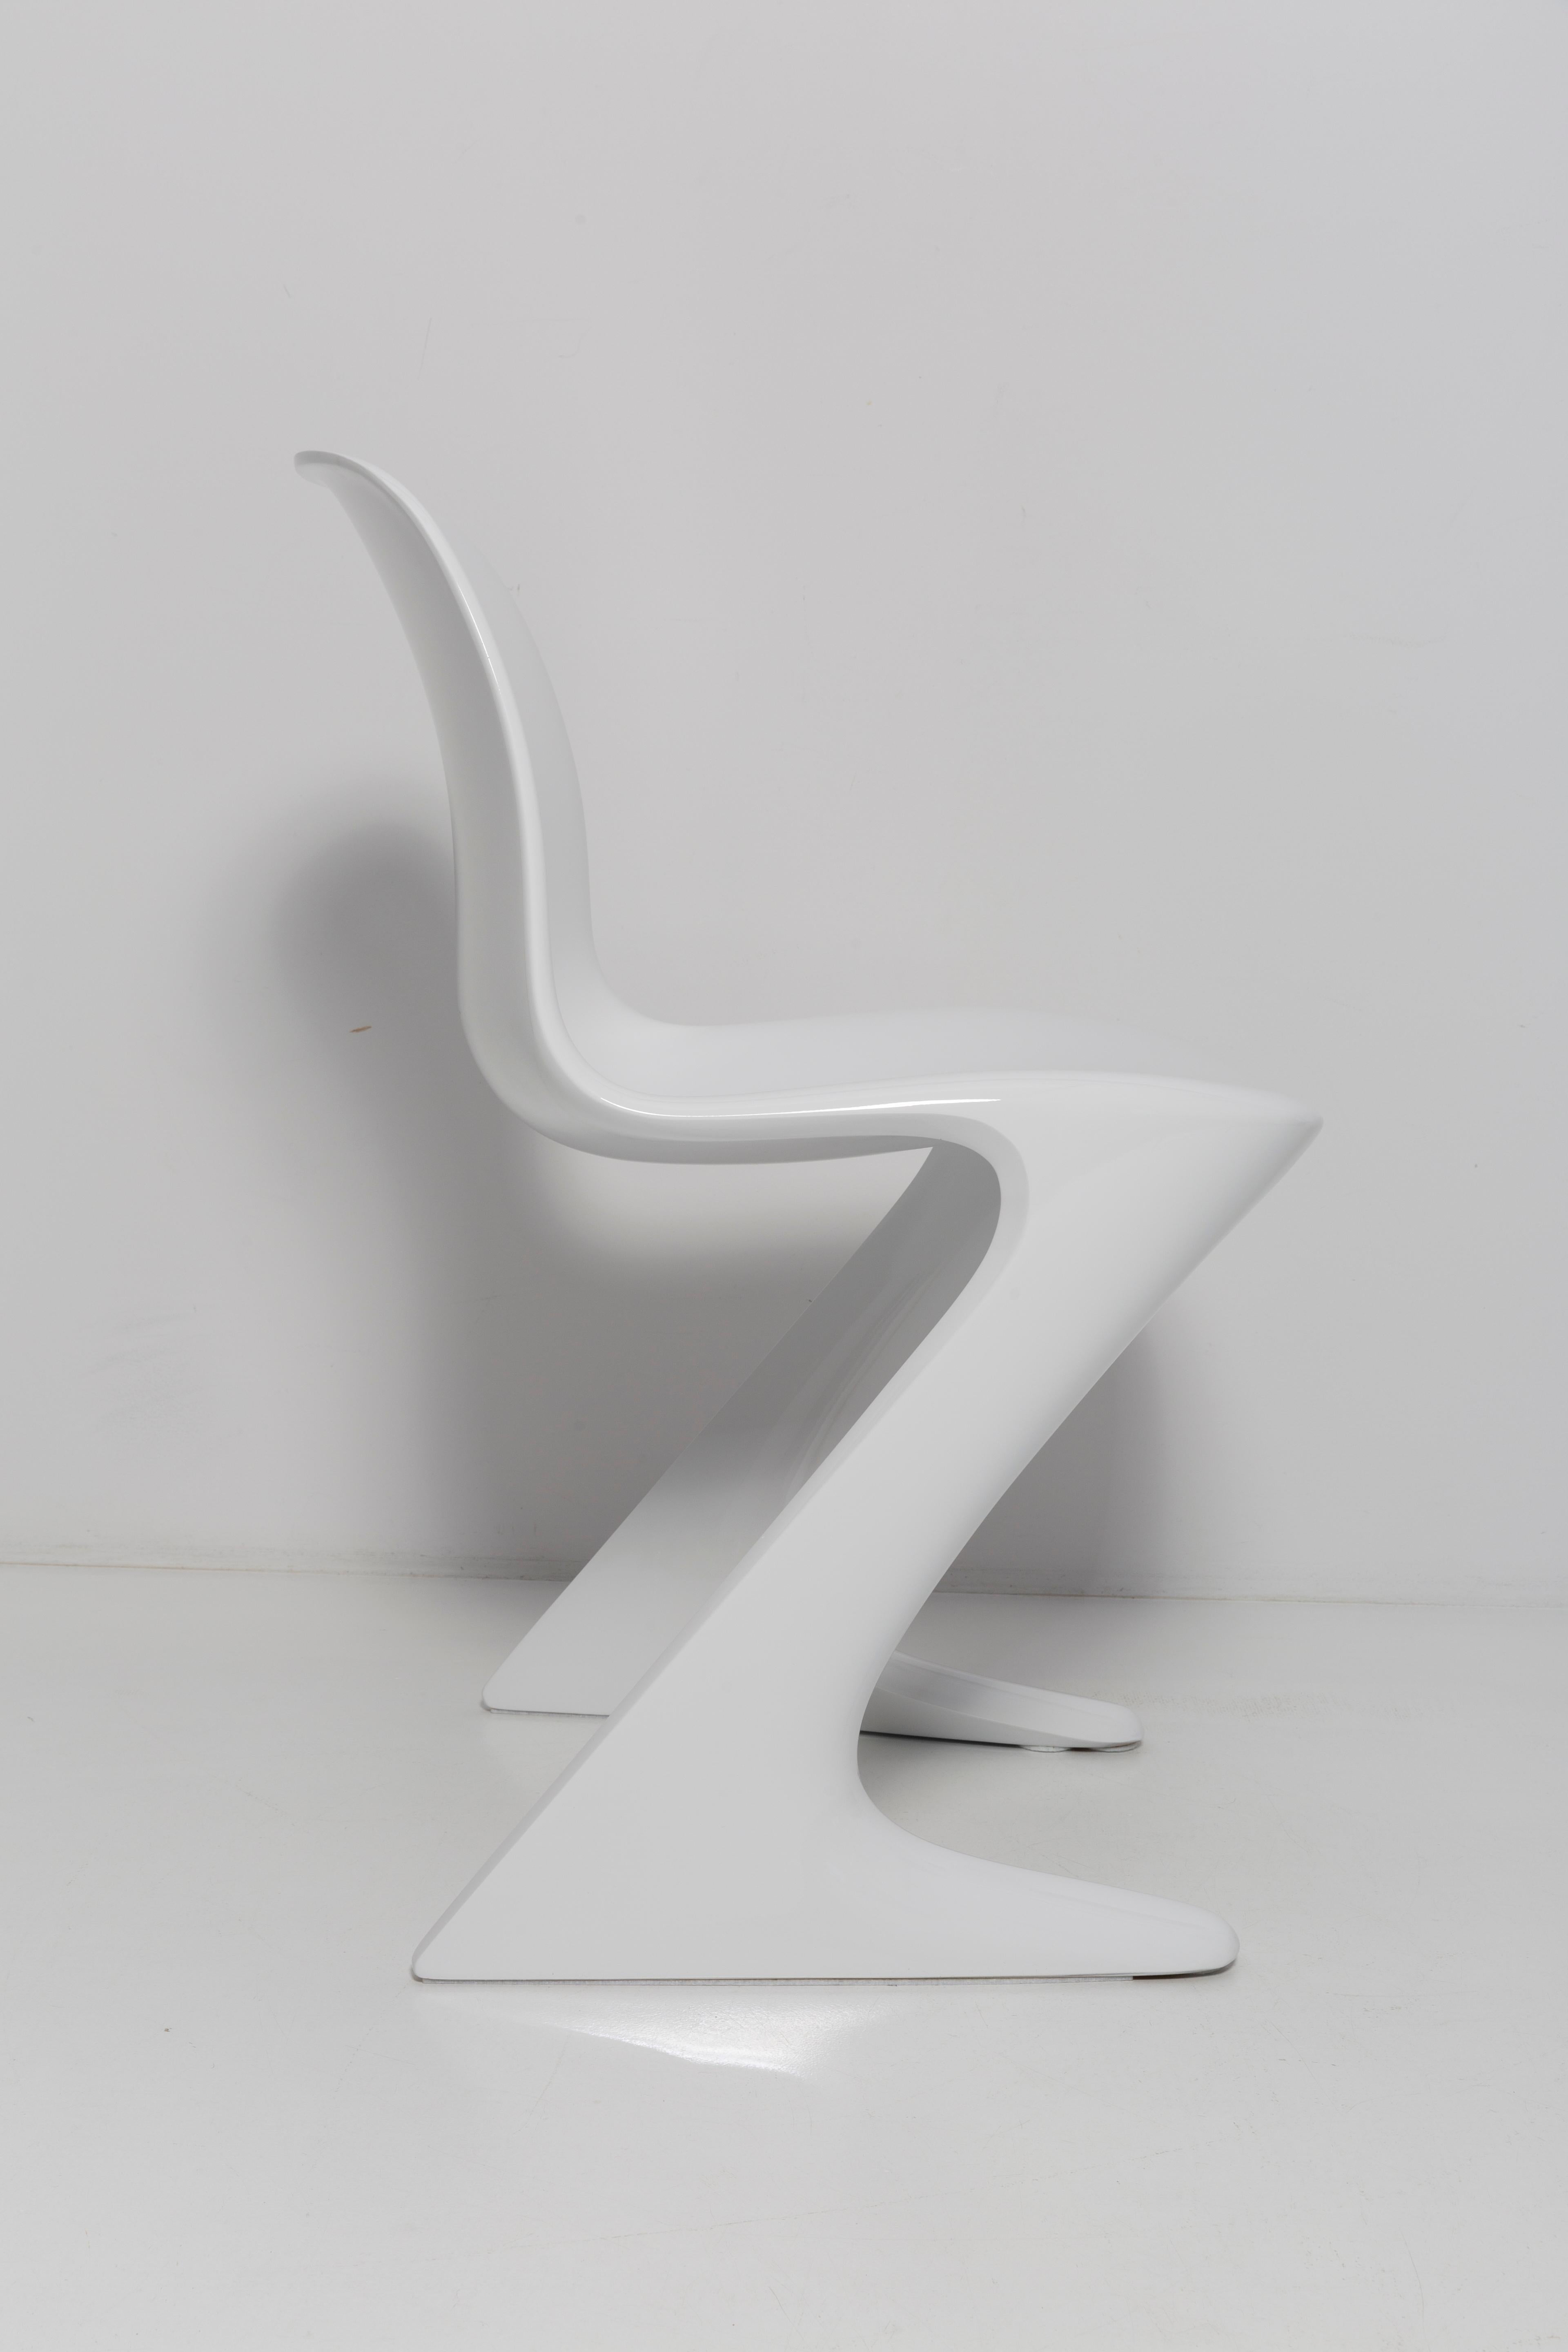 Fiberglass White Glossy Kangaroo Chair Designed by Ernst Moeckl, Germany, 1960s For Sale